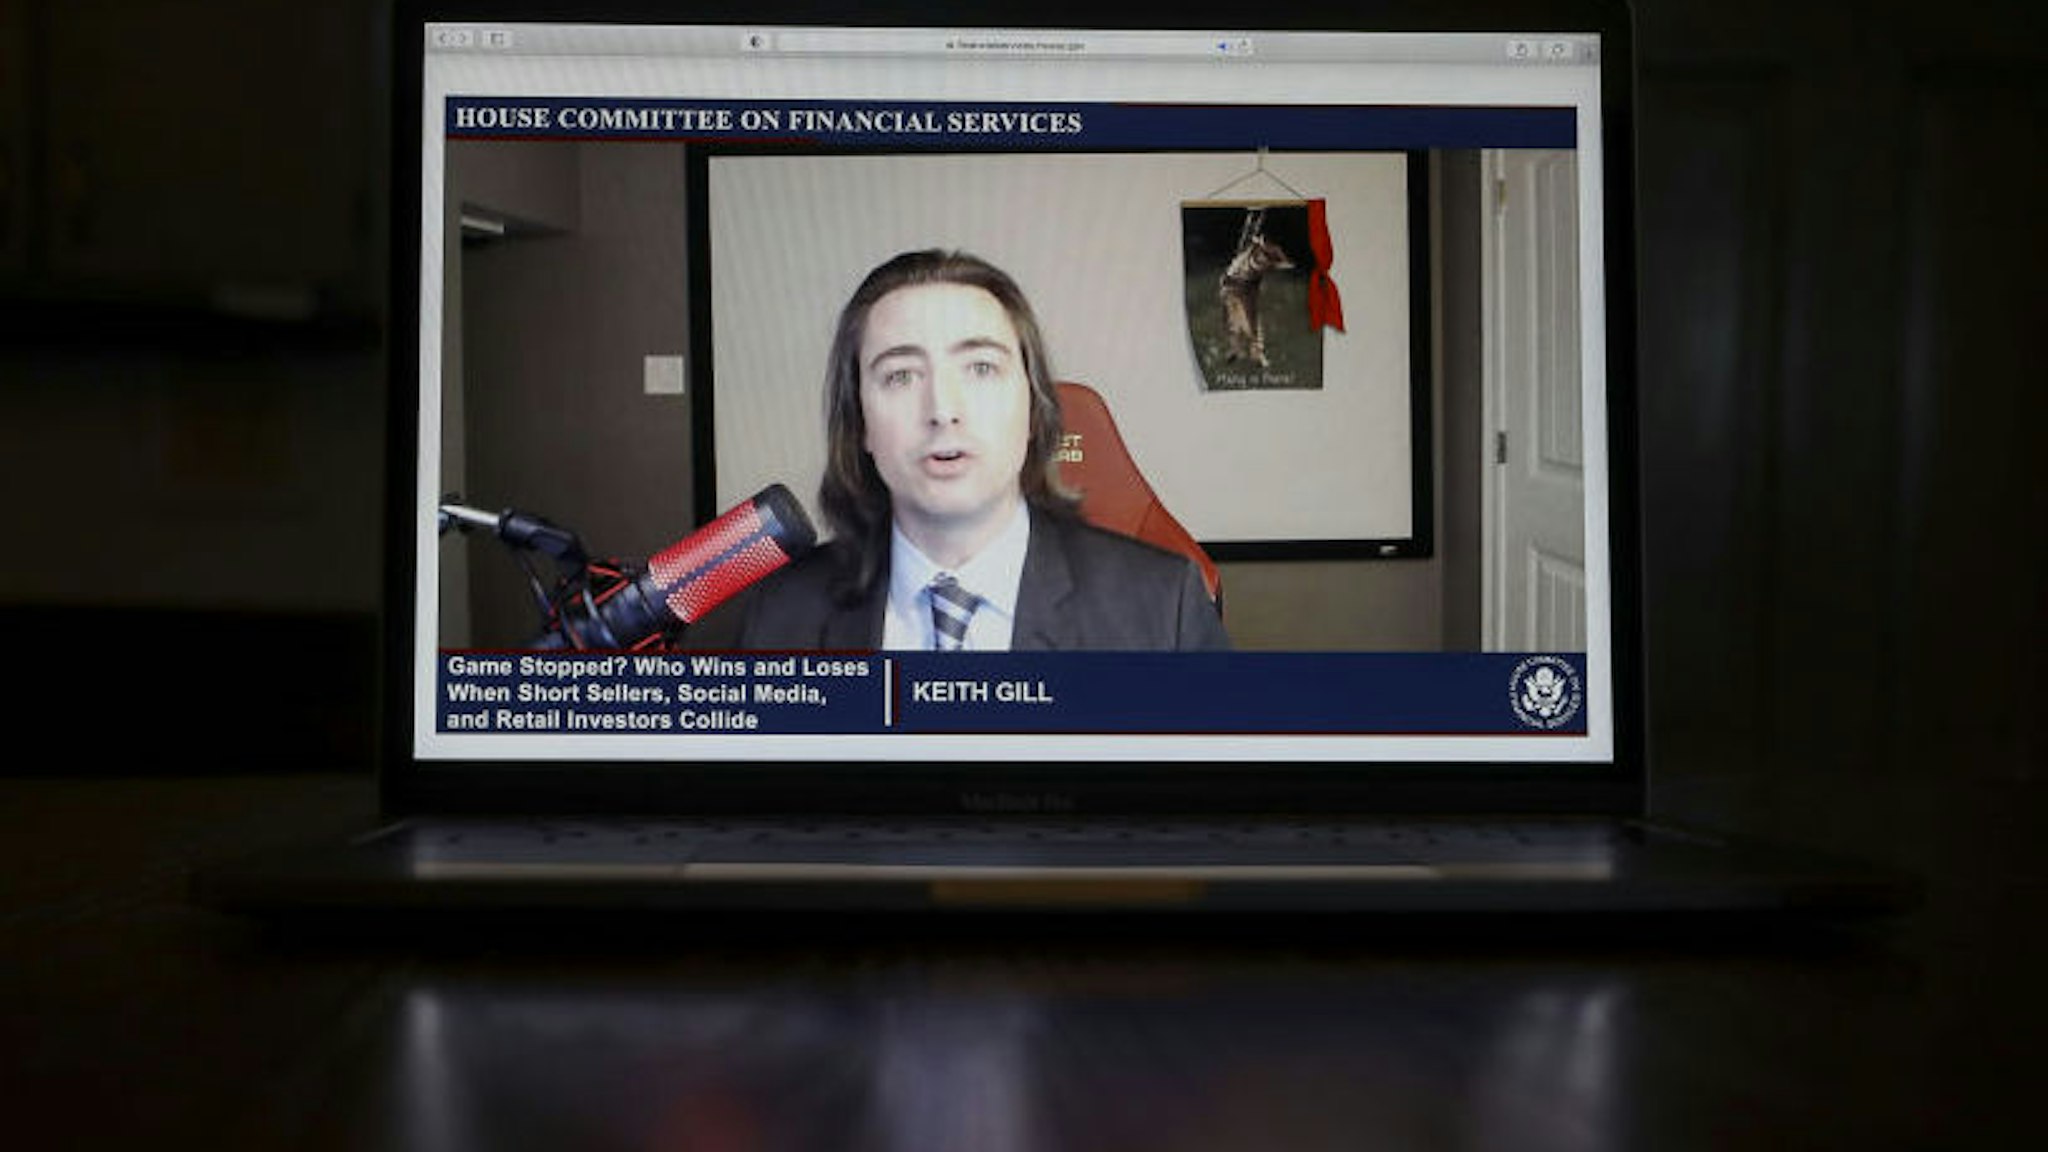 Keith Gill, a Reddit user credited with inspiring GameStop's rally, speaks virtually during a House Financial Services Committee hearing on a laptop computer in Tiskilwa, Illinois, U.S., on Thursday, Feb. 18, 2021.